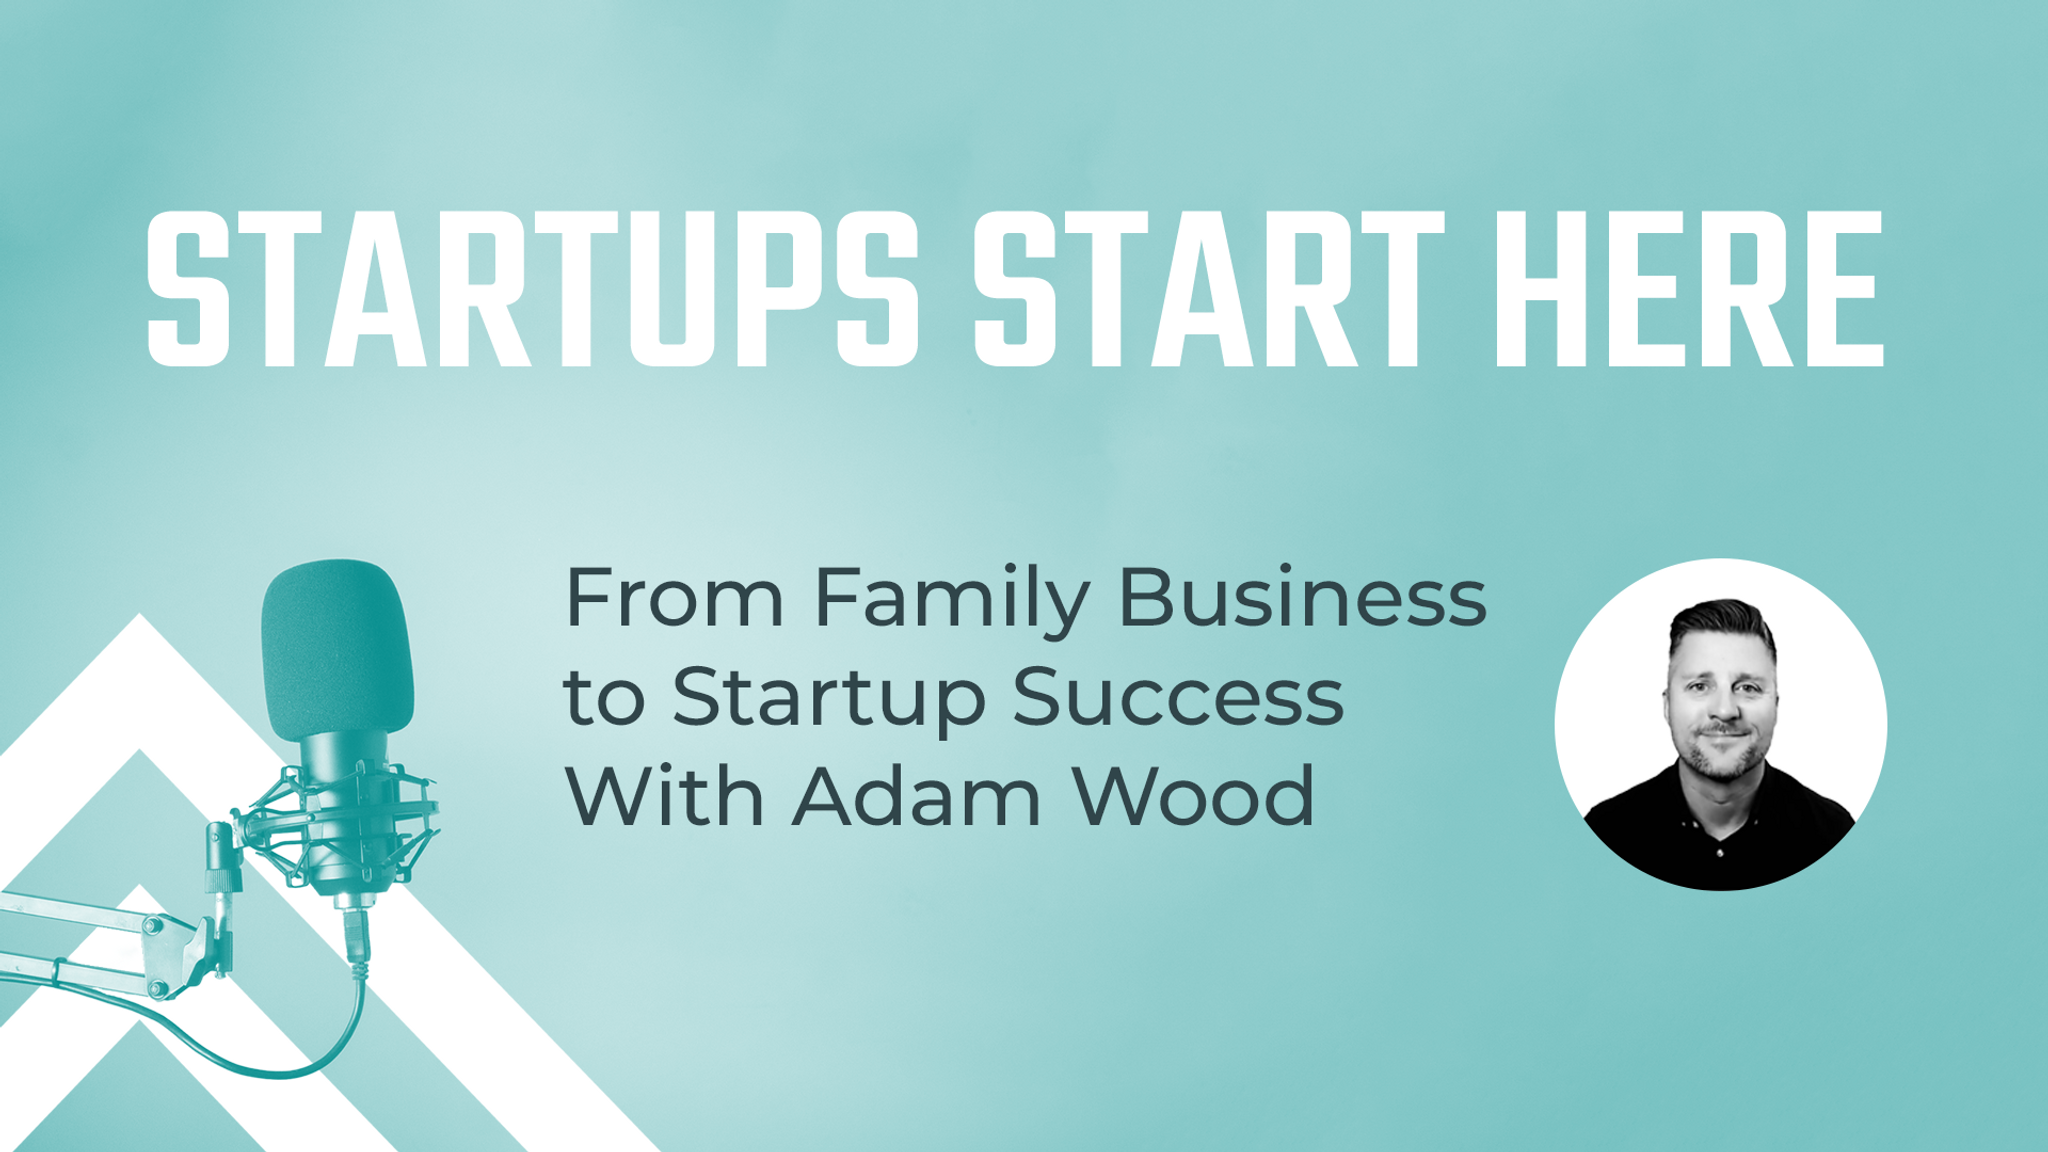 Episode 2 is Here! From Family Business to Startup Success with Adam Wood